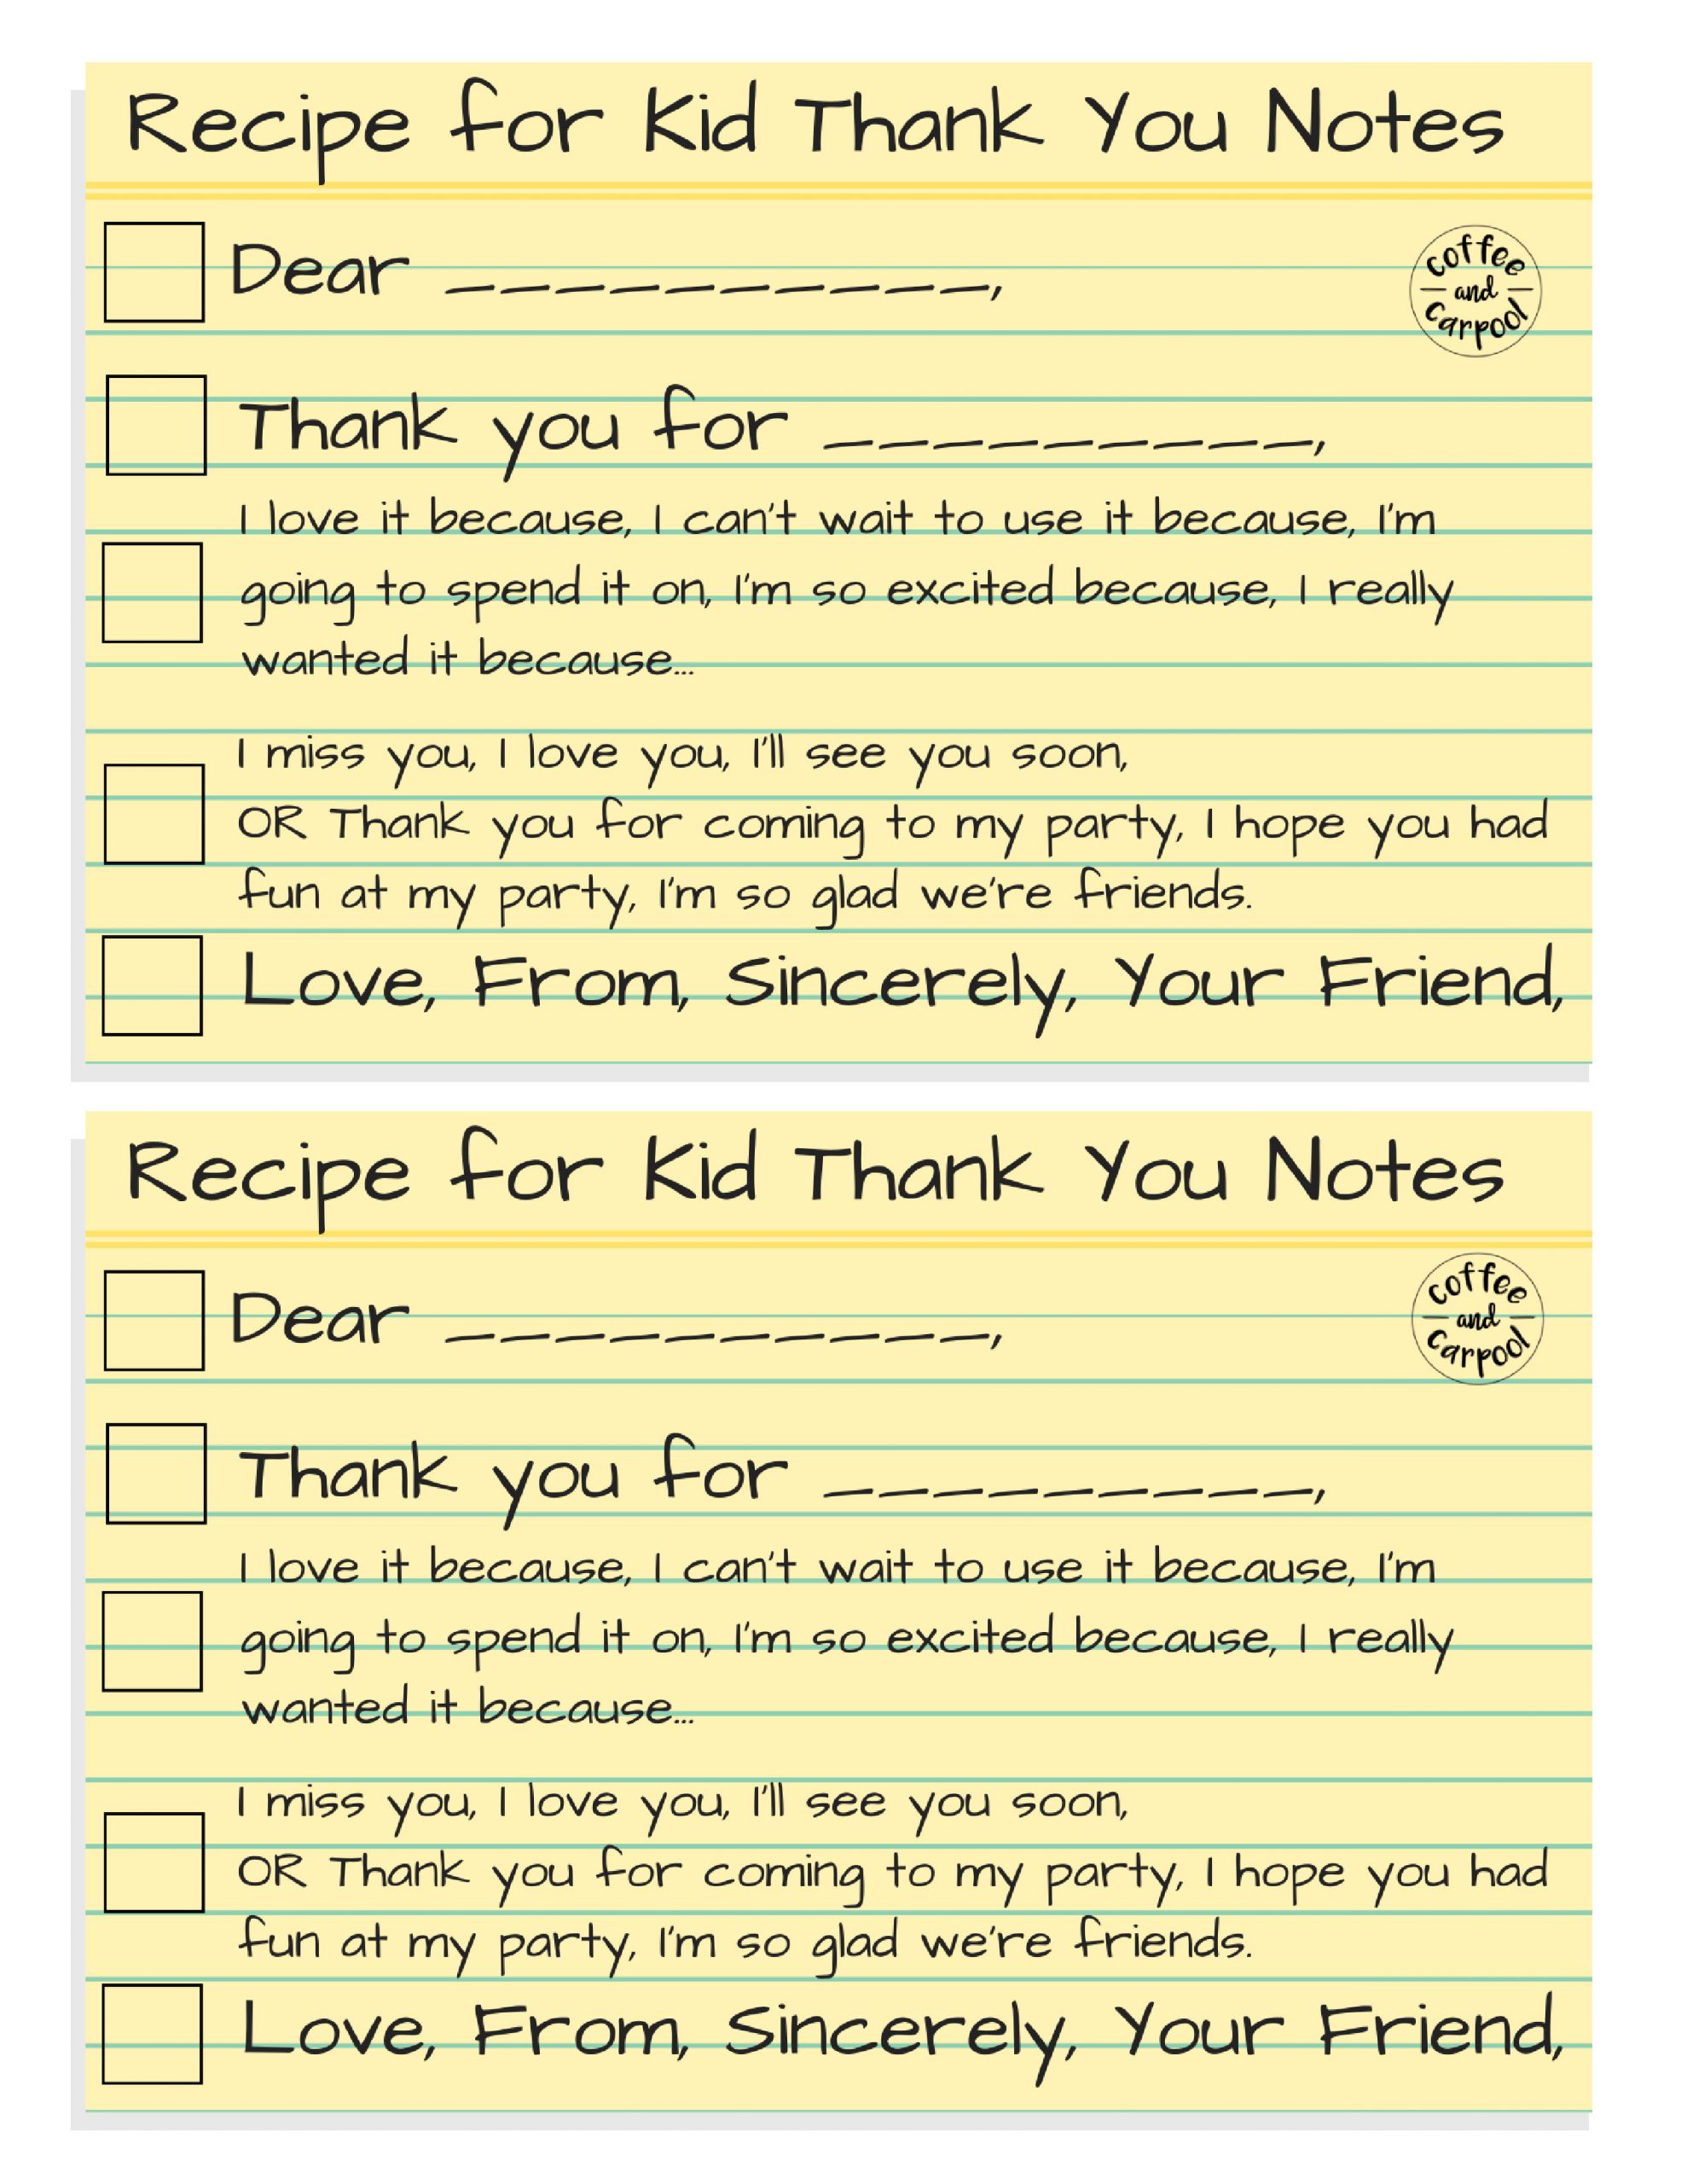 recipe for thank you notes png